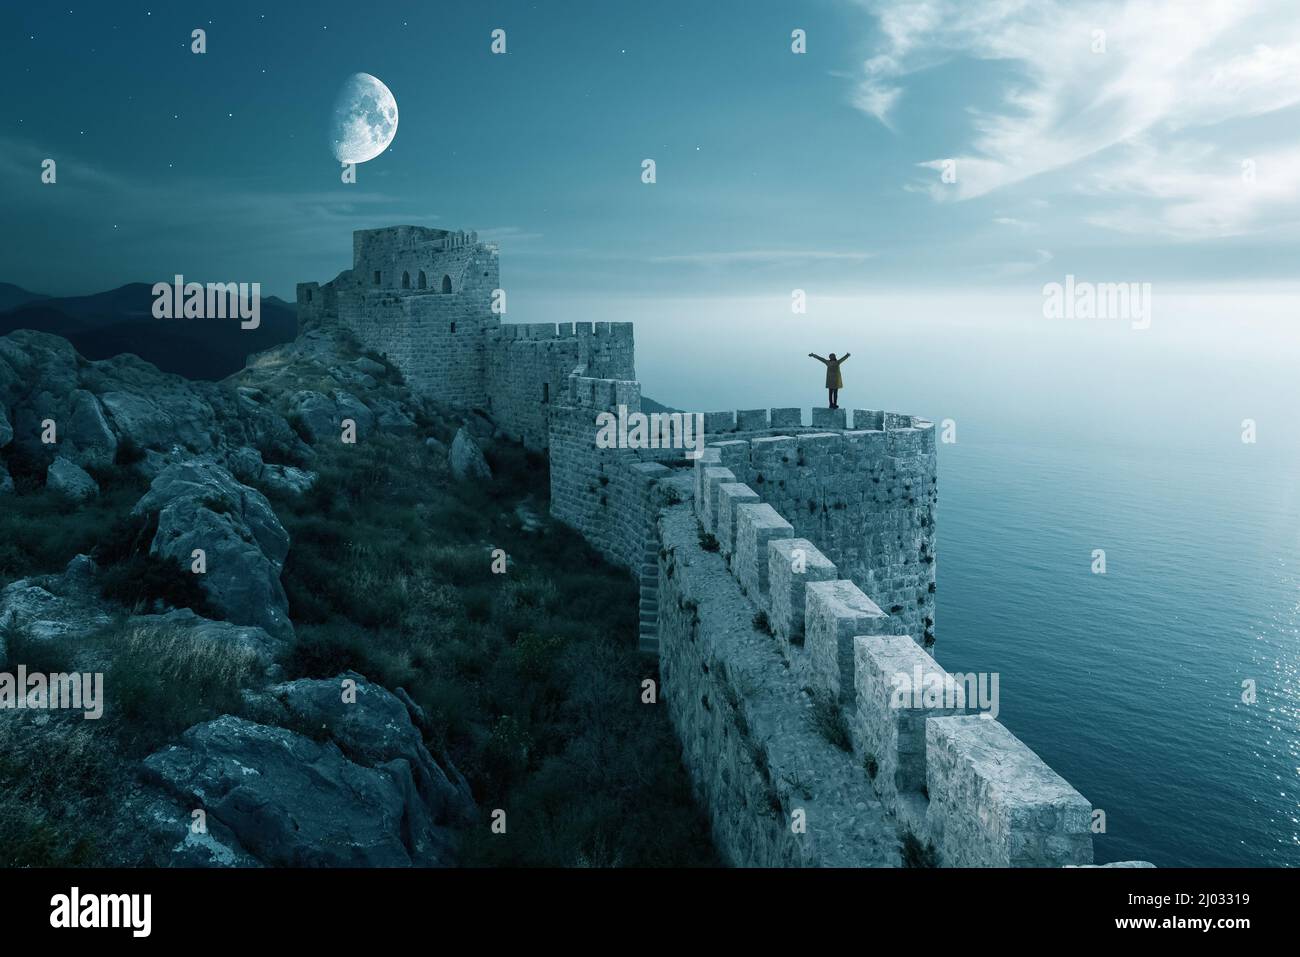 A woman stand ond the walls of a medieval fortress. Wall and tower of a Fotification landscape with moon on sky. High quality photo Stock Photo